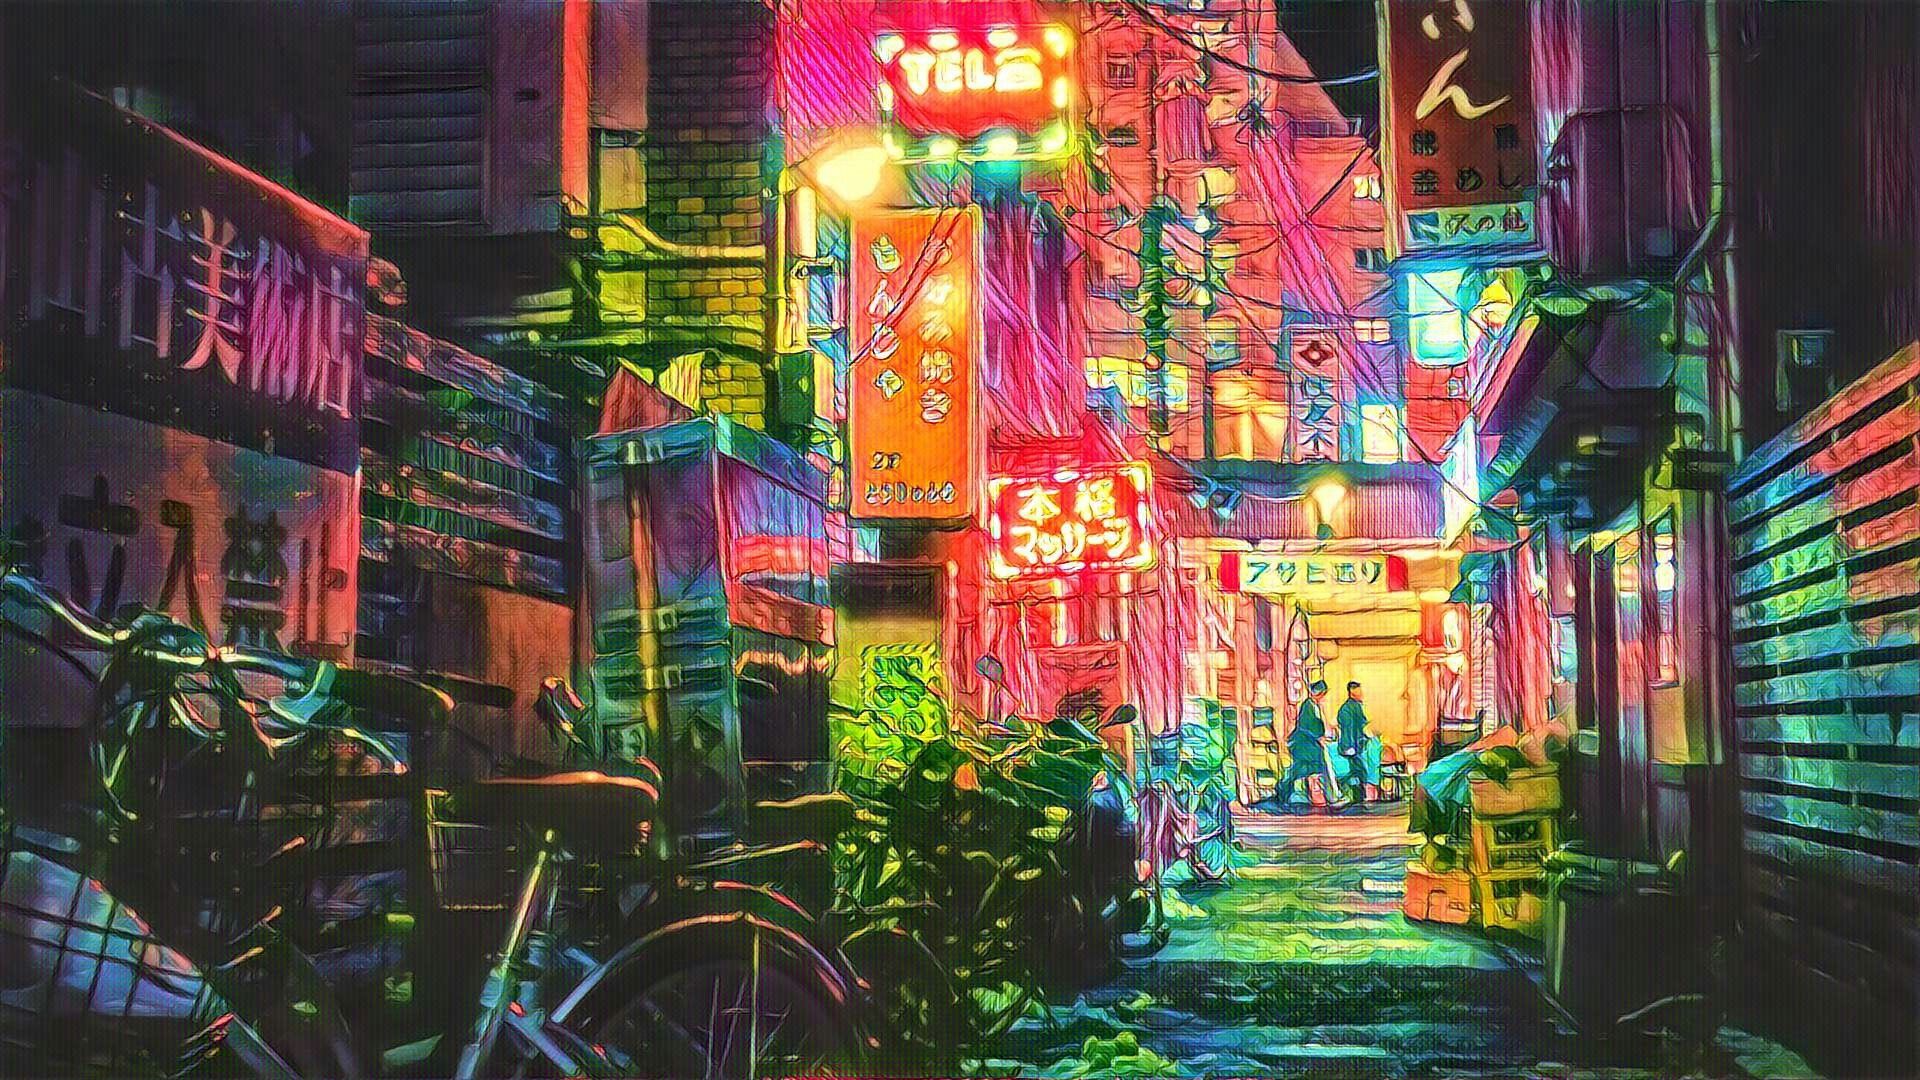 You can also upload and share your favorite Japanese city neon anime wallpa...